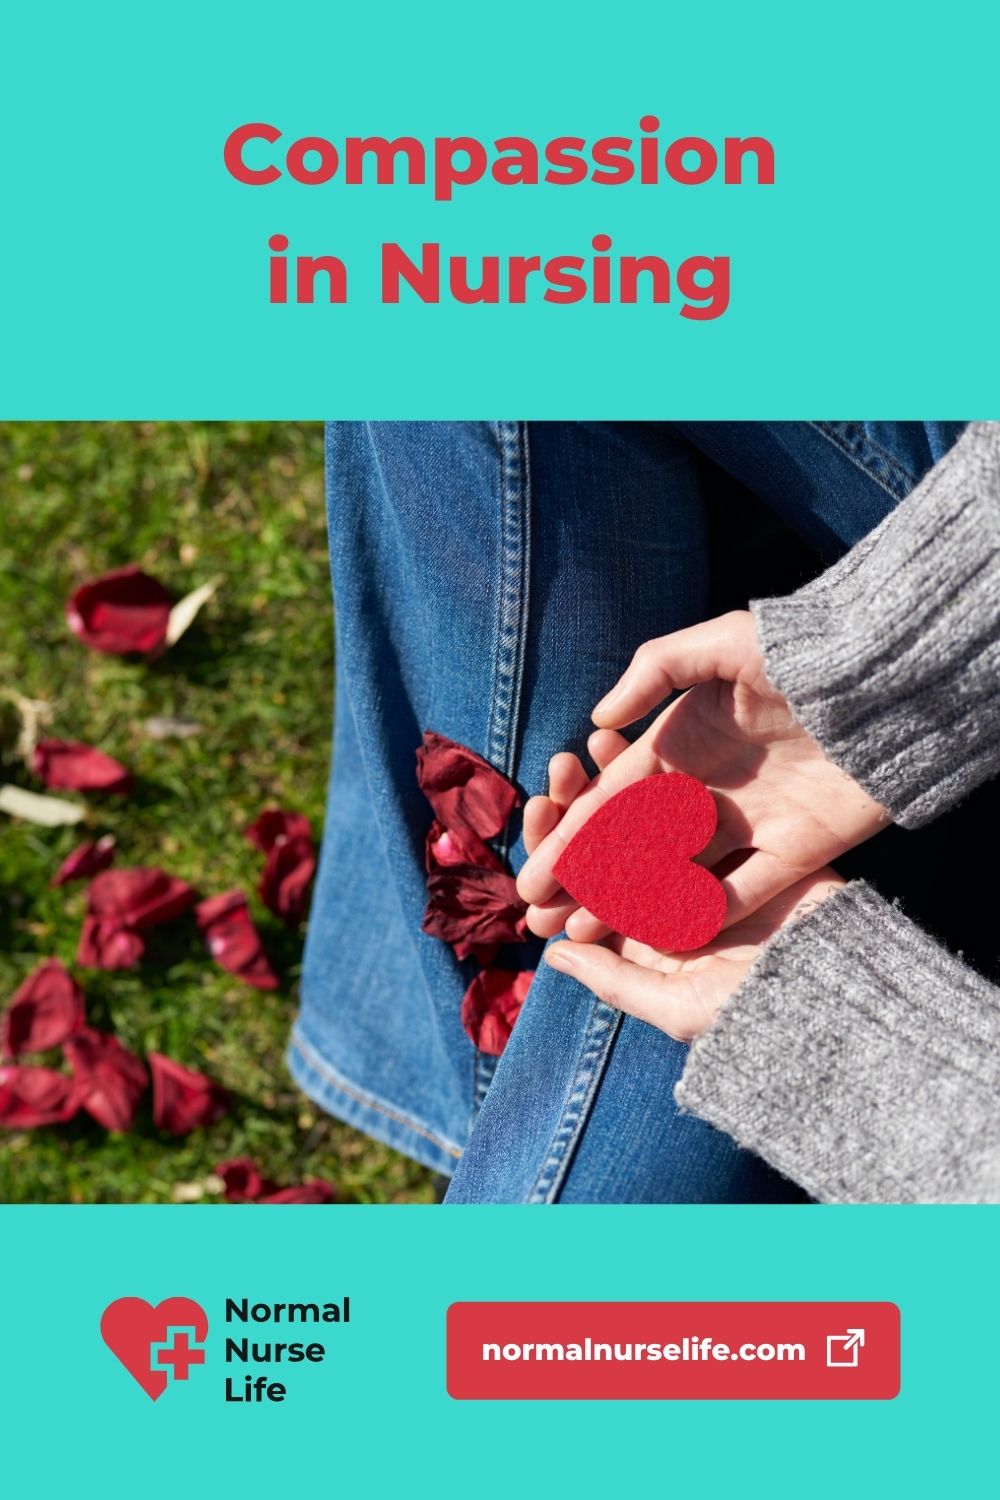 Compassion within nursing